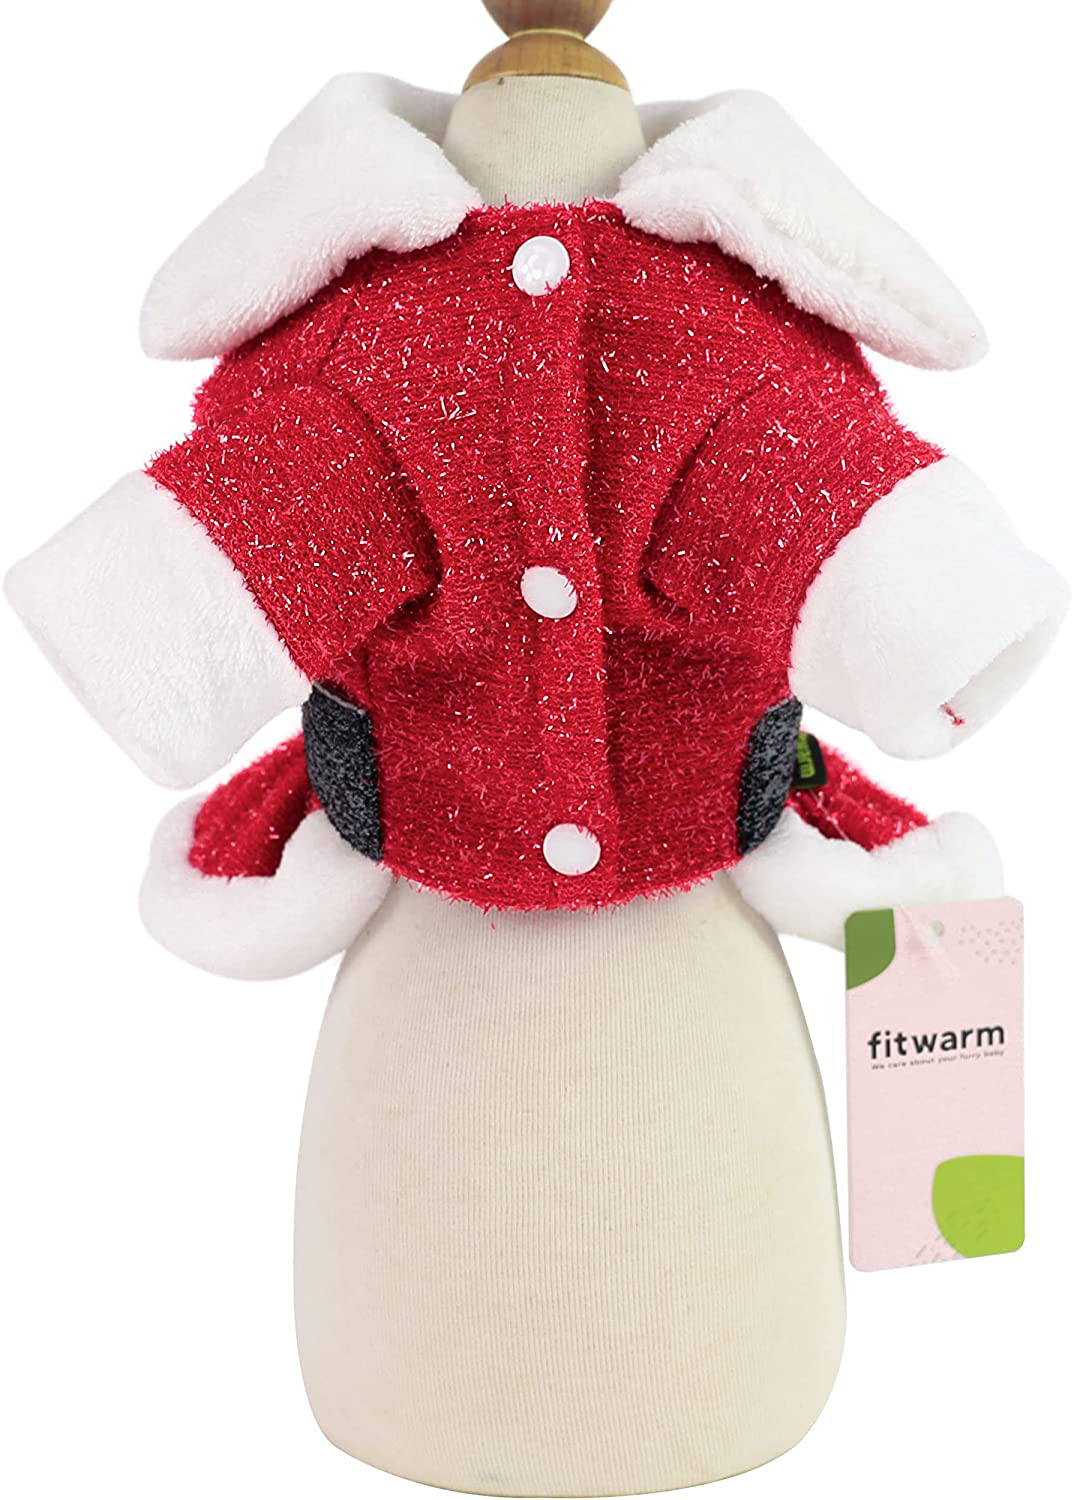 Fitwarm Bling Bling Santa Claus Dog Christmas Outfit Thermal Holiday Girl Puppy Costume Velvet Dogs Dress Pet Winter Clothes Cat Coat Doggie Jackets Apparel